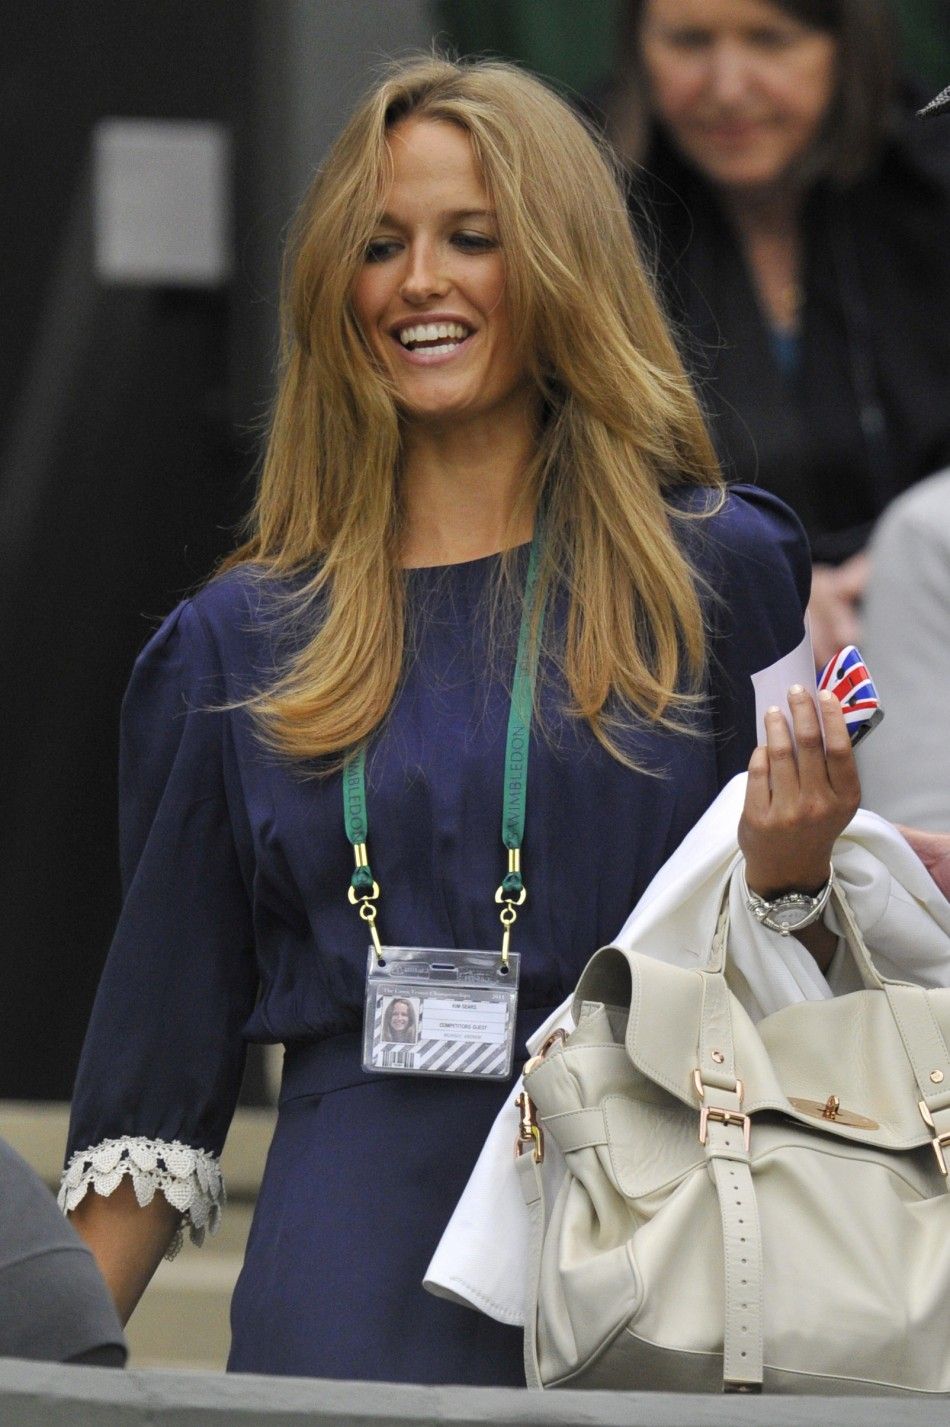 Kim Sears, the girlfriend of Andy Murray of Britain, arrives on Centre Court for the match between Murray and Ivan Ljubicic of Croatia at the Wimbledon tennis championships in London